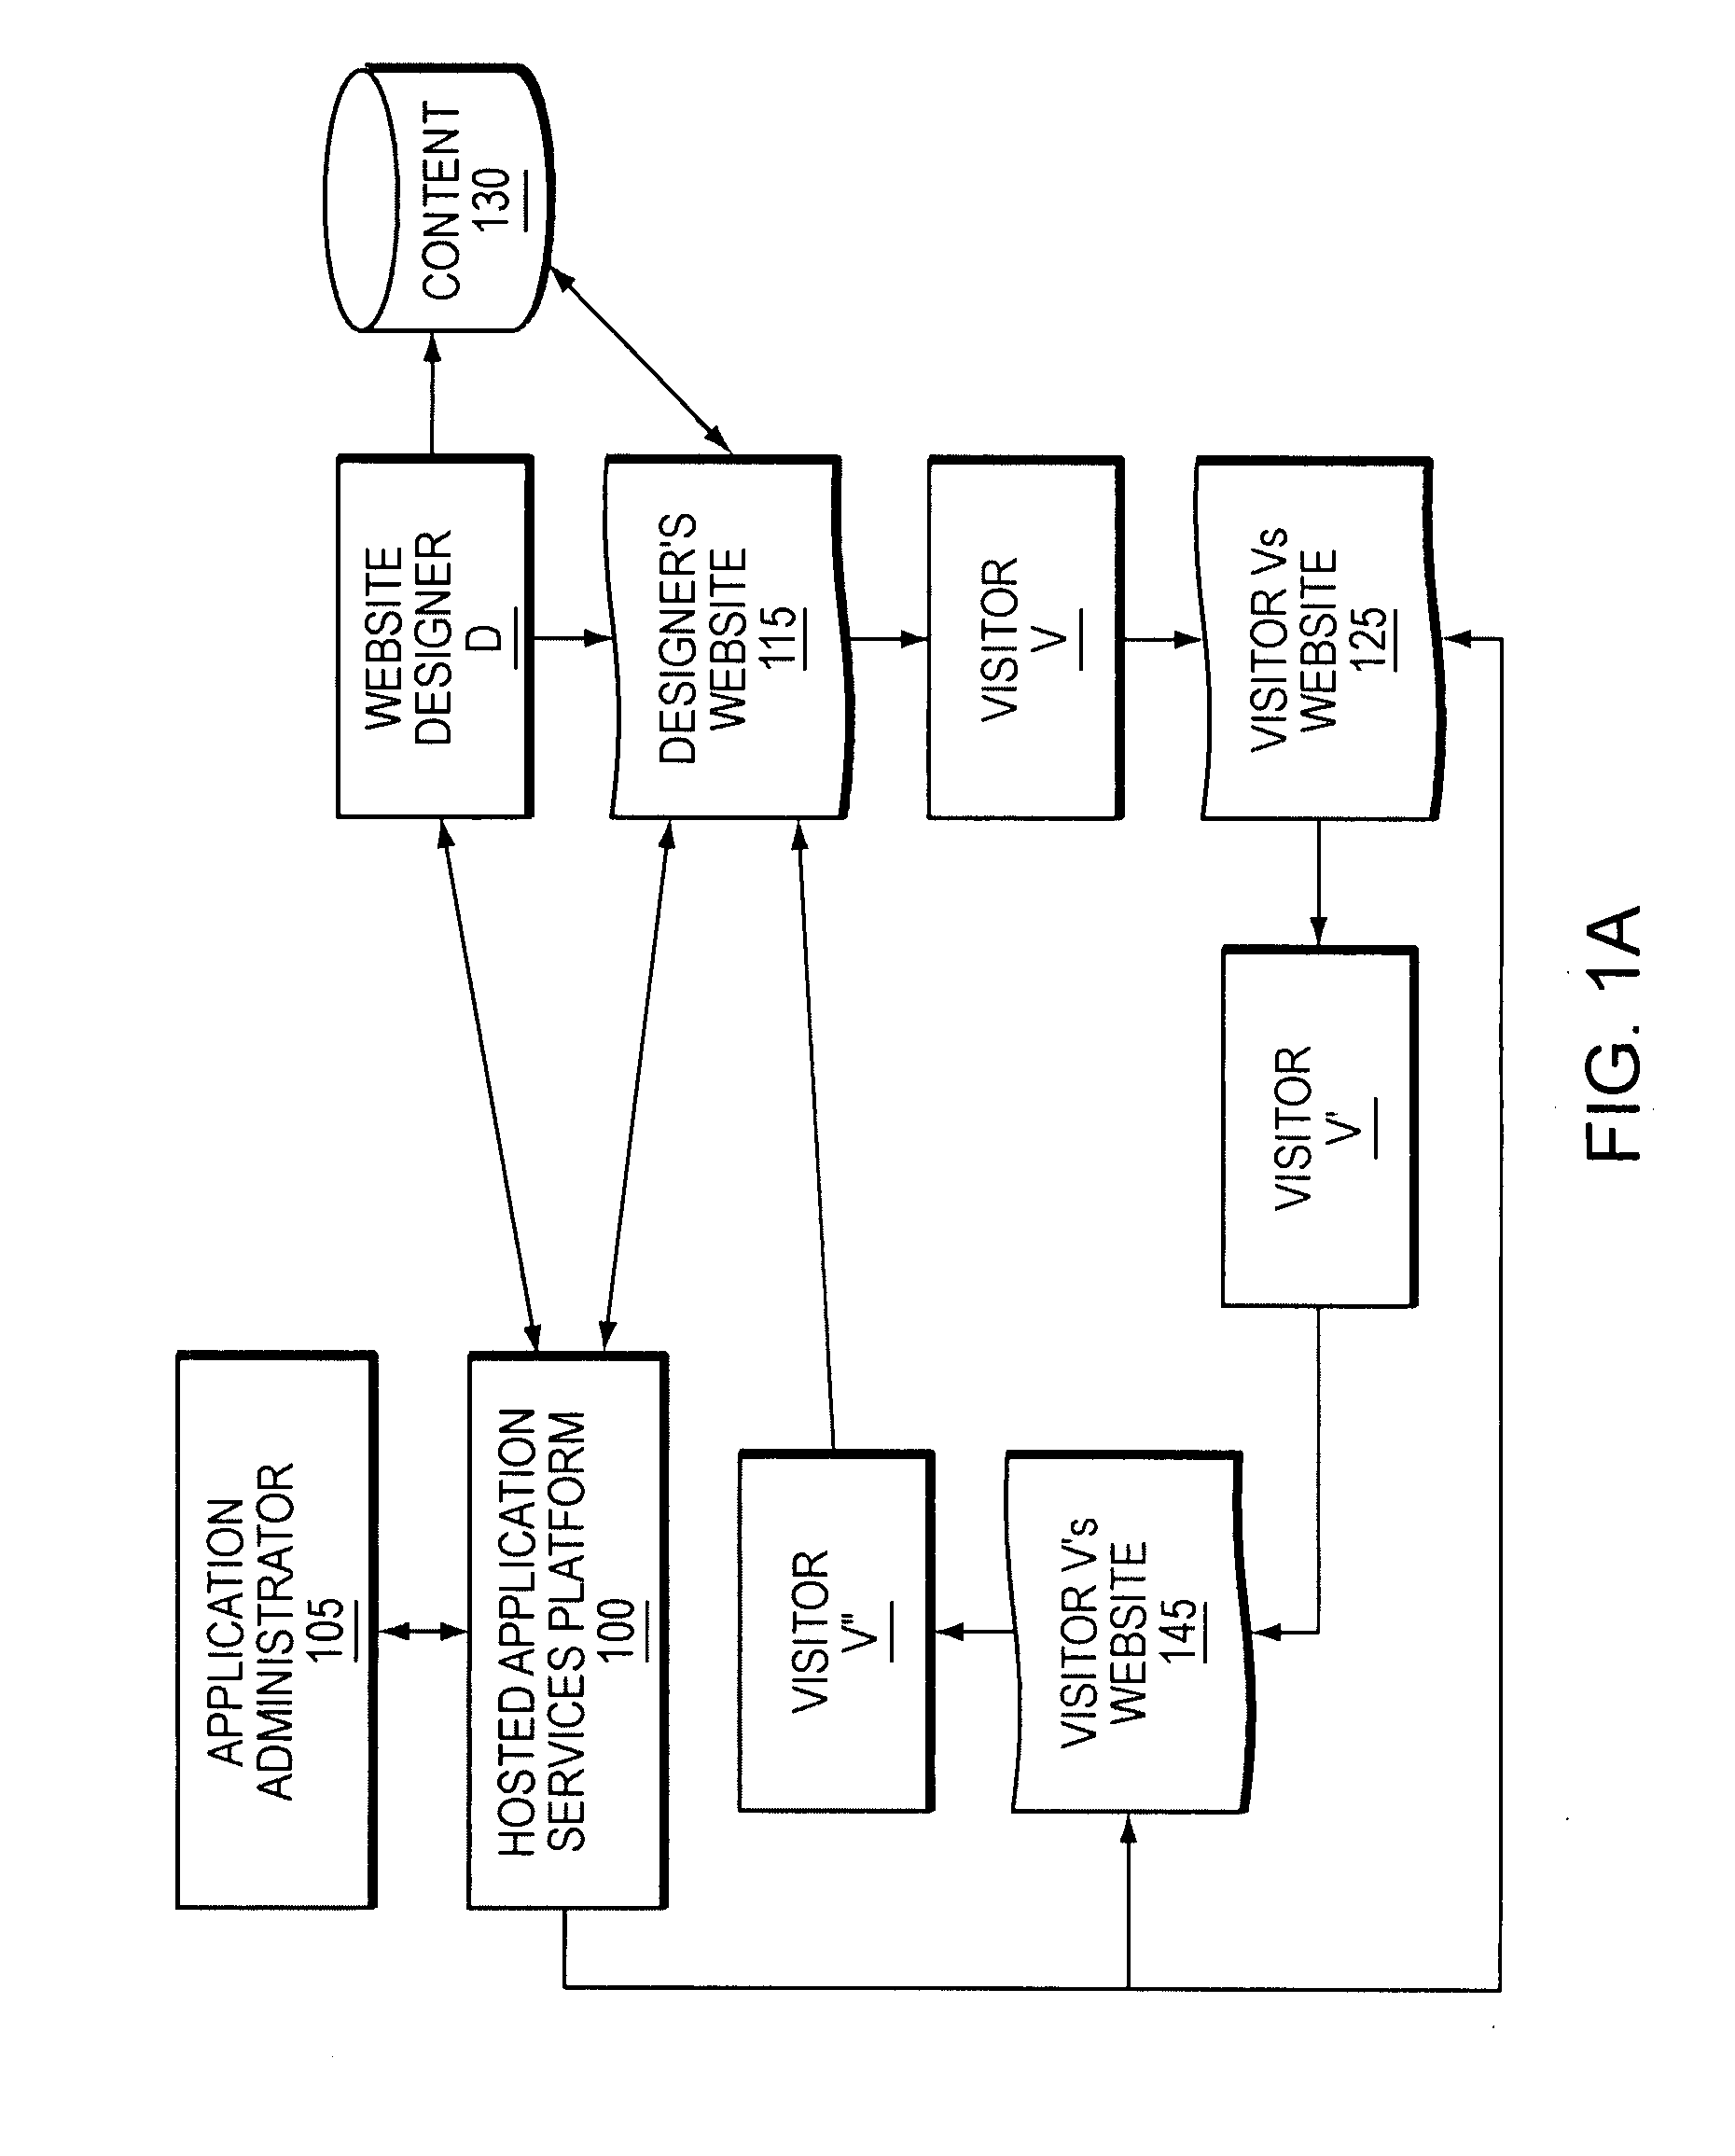 Method and Apparatus for Proliferating Adoption of Web Components